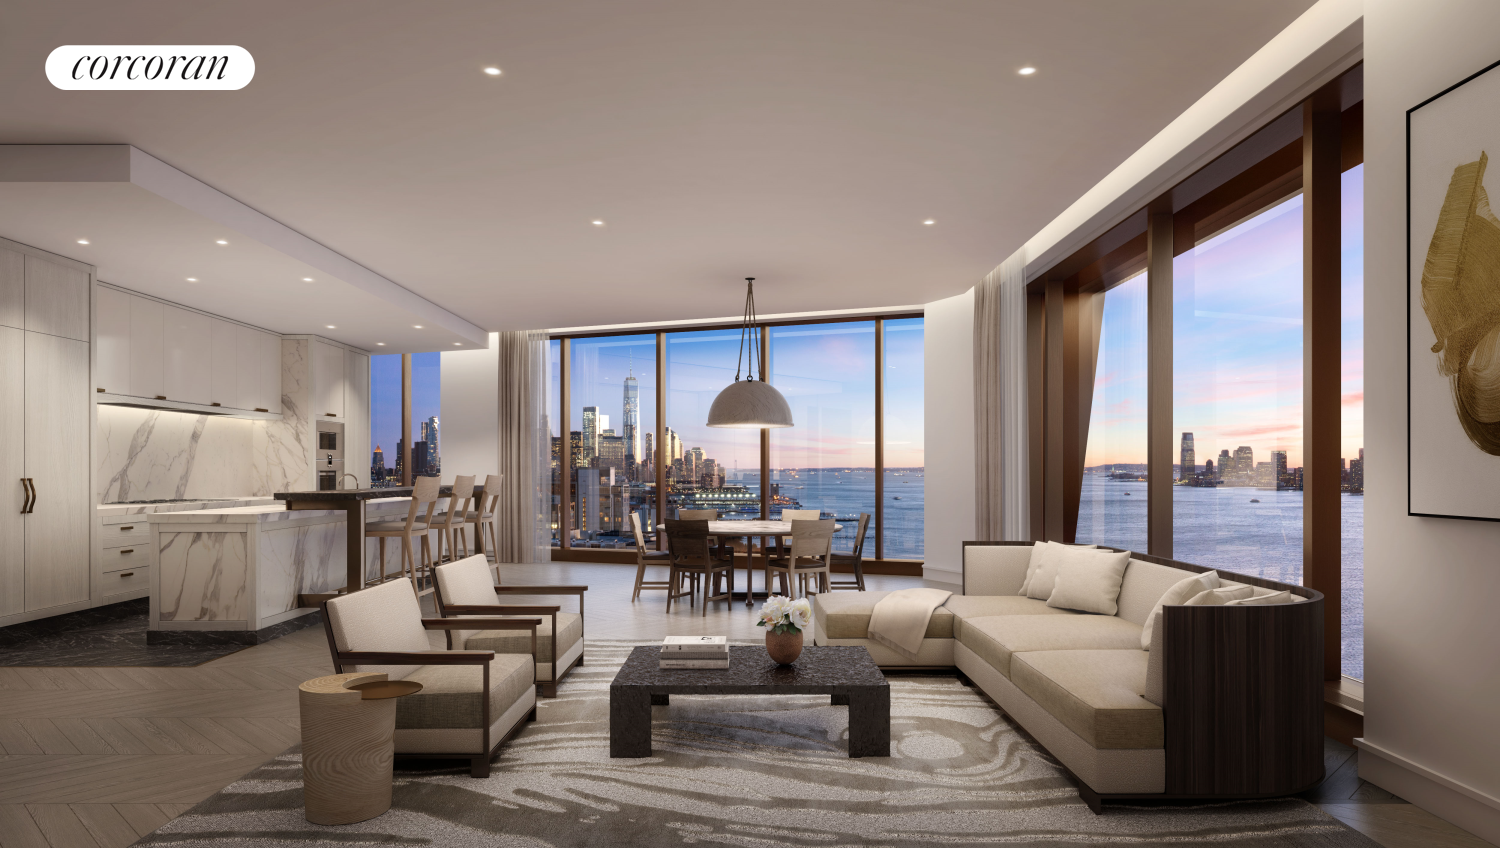 500 West 18th Street East Ph25a, Chelsea, Downtown, NYC - 4 Bedrooms  
4.5 Bathrooms  
6 Rooms - 